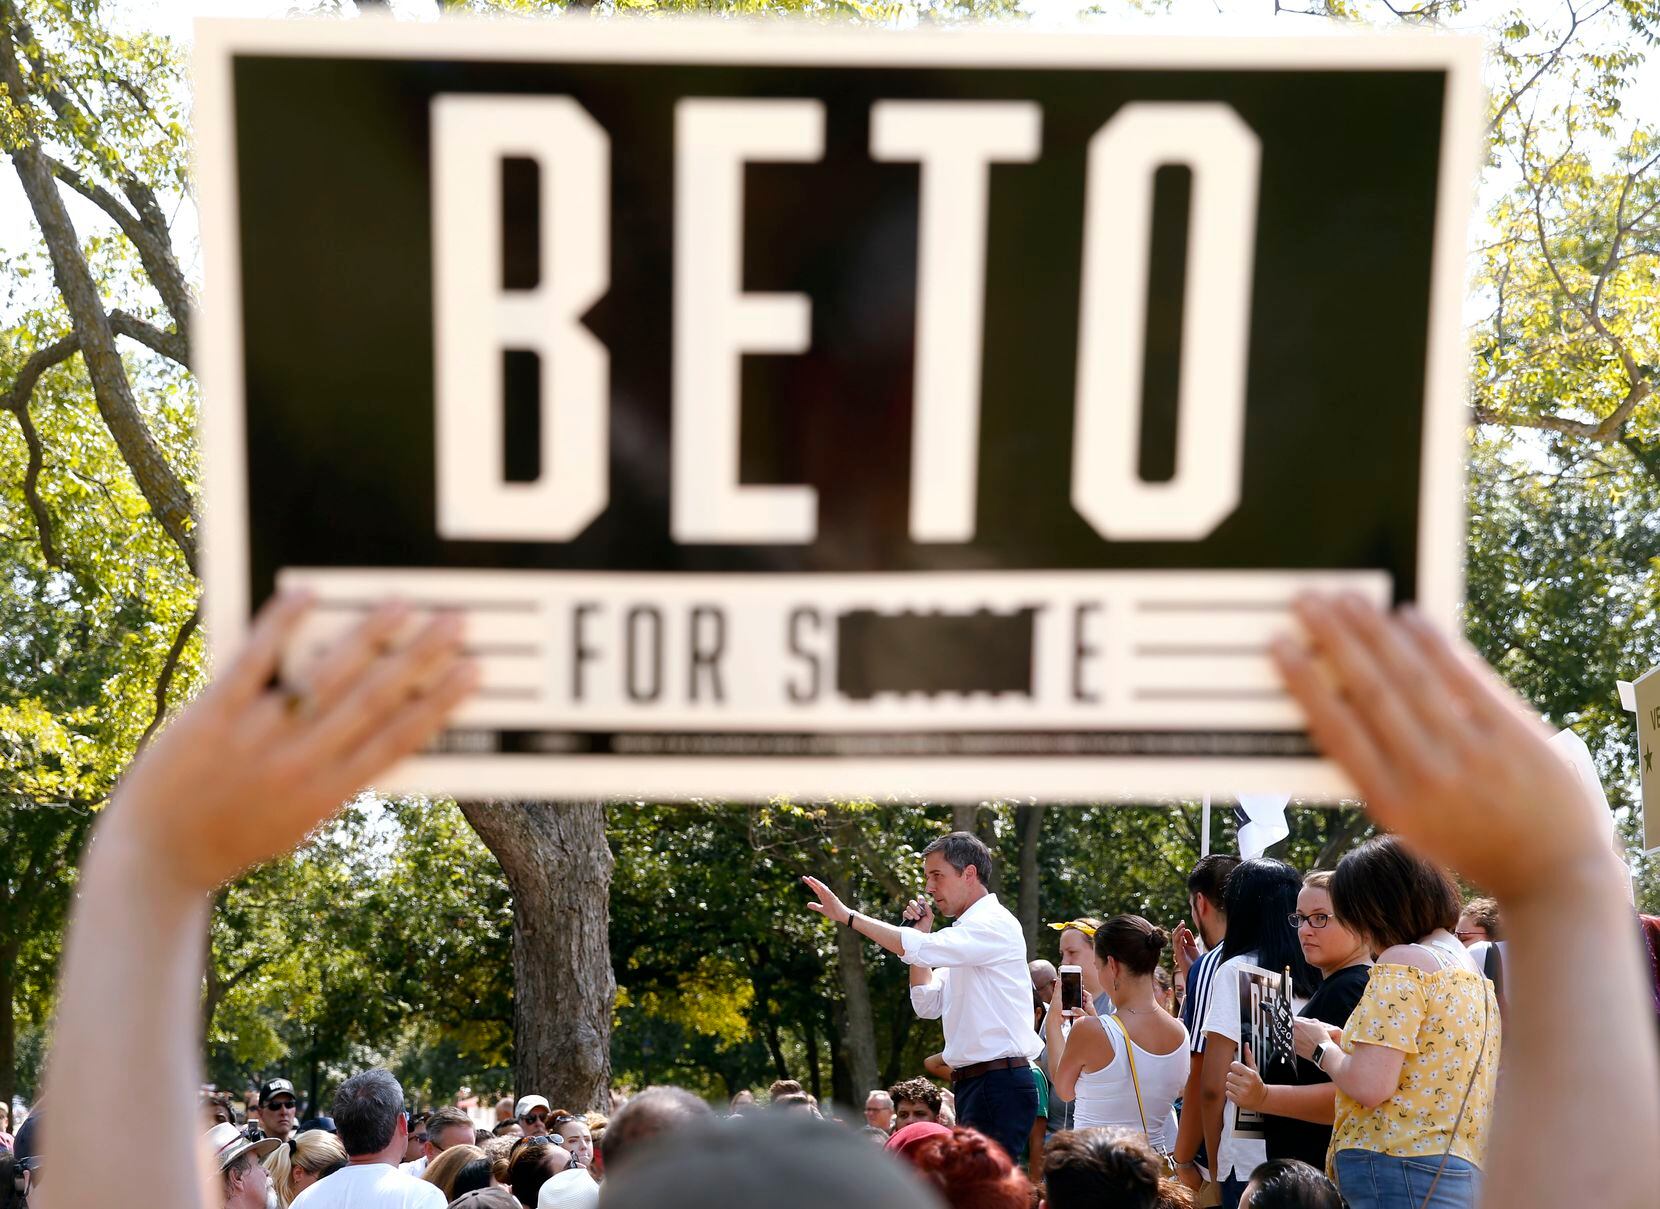 A fan holds up a sign from when Democratic Presidential candidate Beto O'Rourke previously ran for Senate and lost, during O'Rourke's campaign event at Haggard Park in Plano, Texas, on Sunday, September 15, 2019.